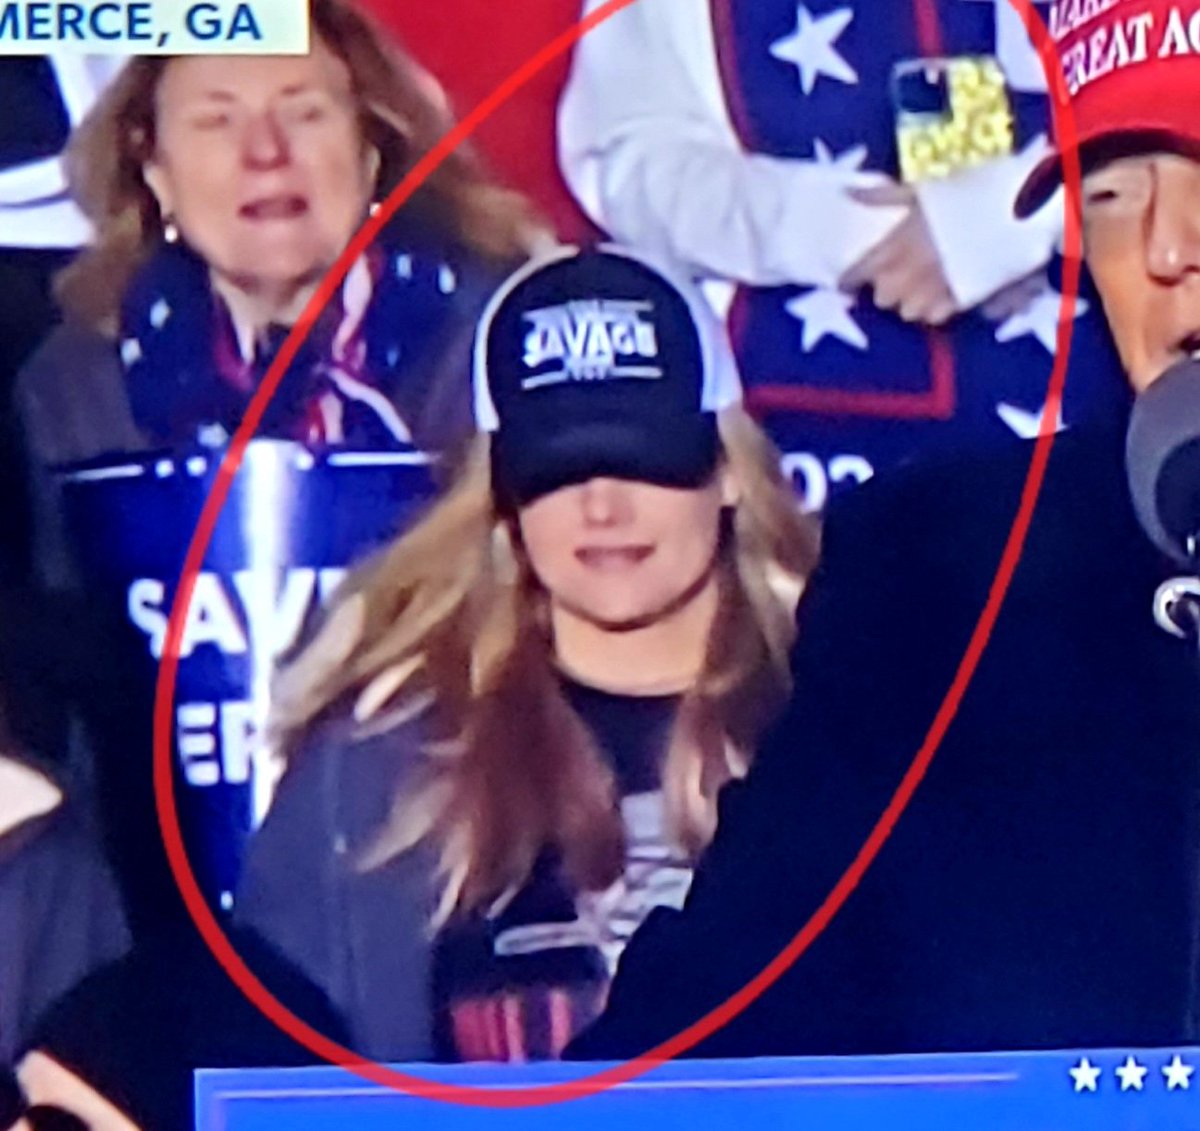 I want this girl to be my DIL!  My son is 28 from Southern CA living in Texas...heading to Tennessee! #TrumpRallyga I'll buy the ticket and dinner if you're single! #TRUMP2024